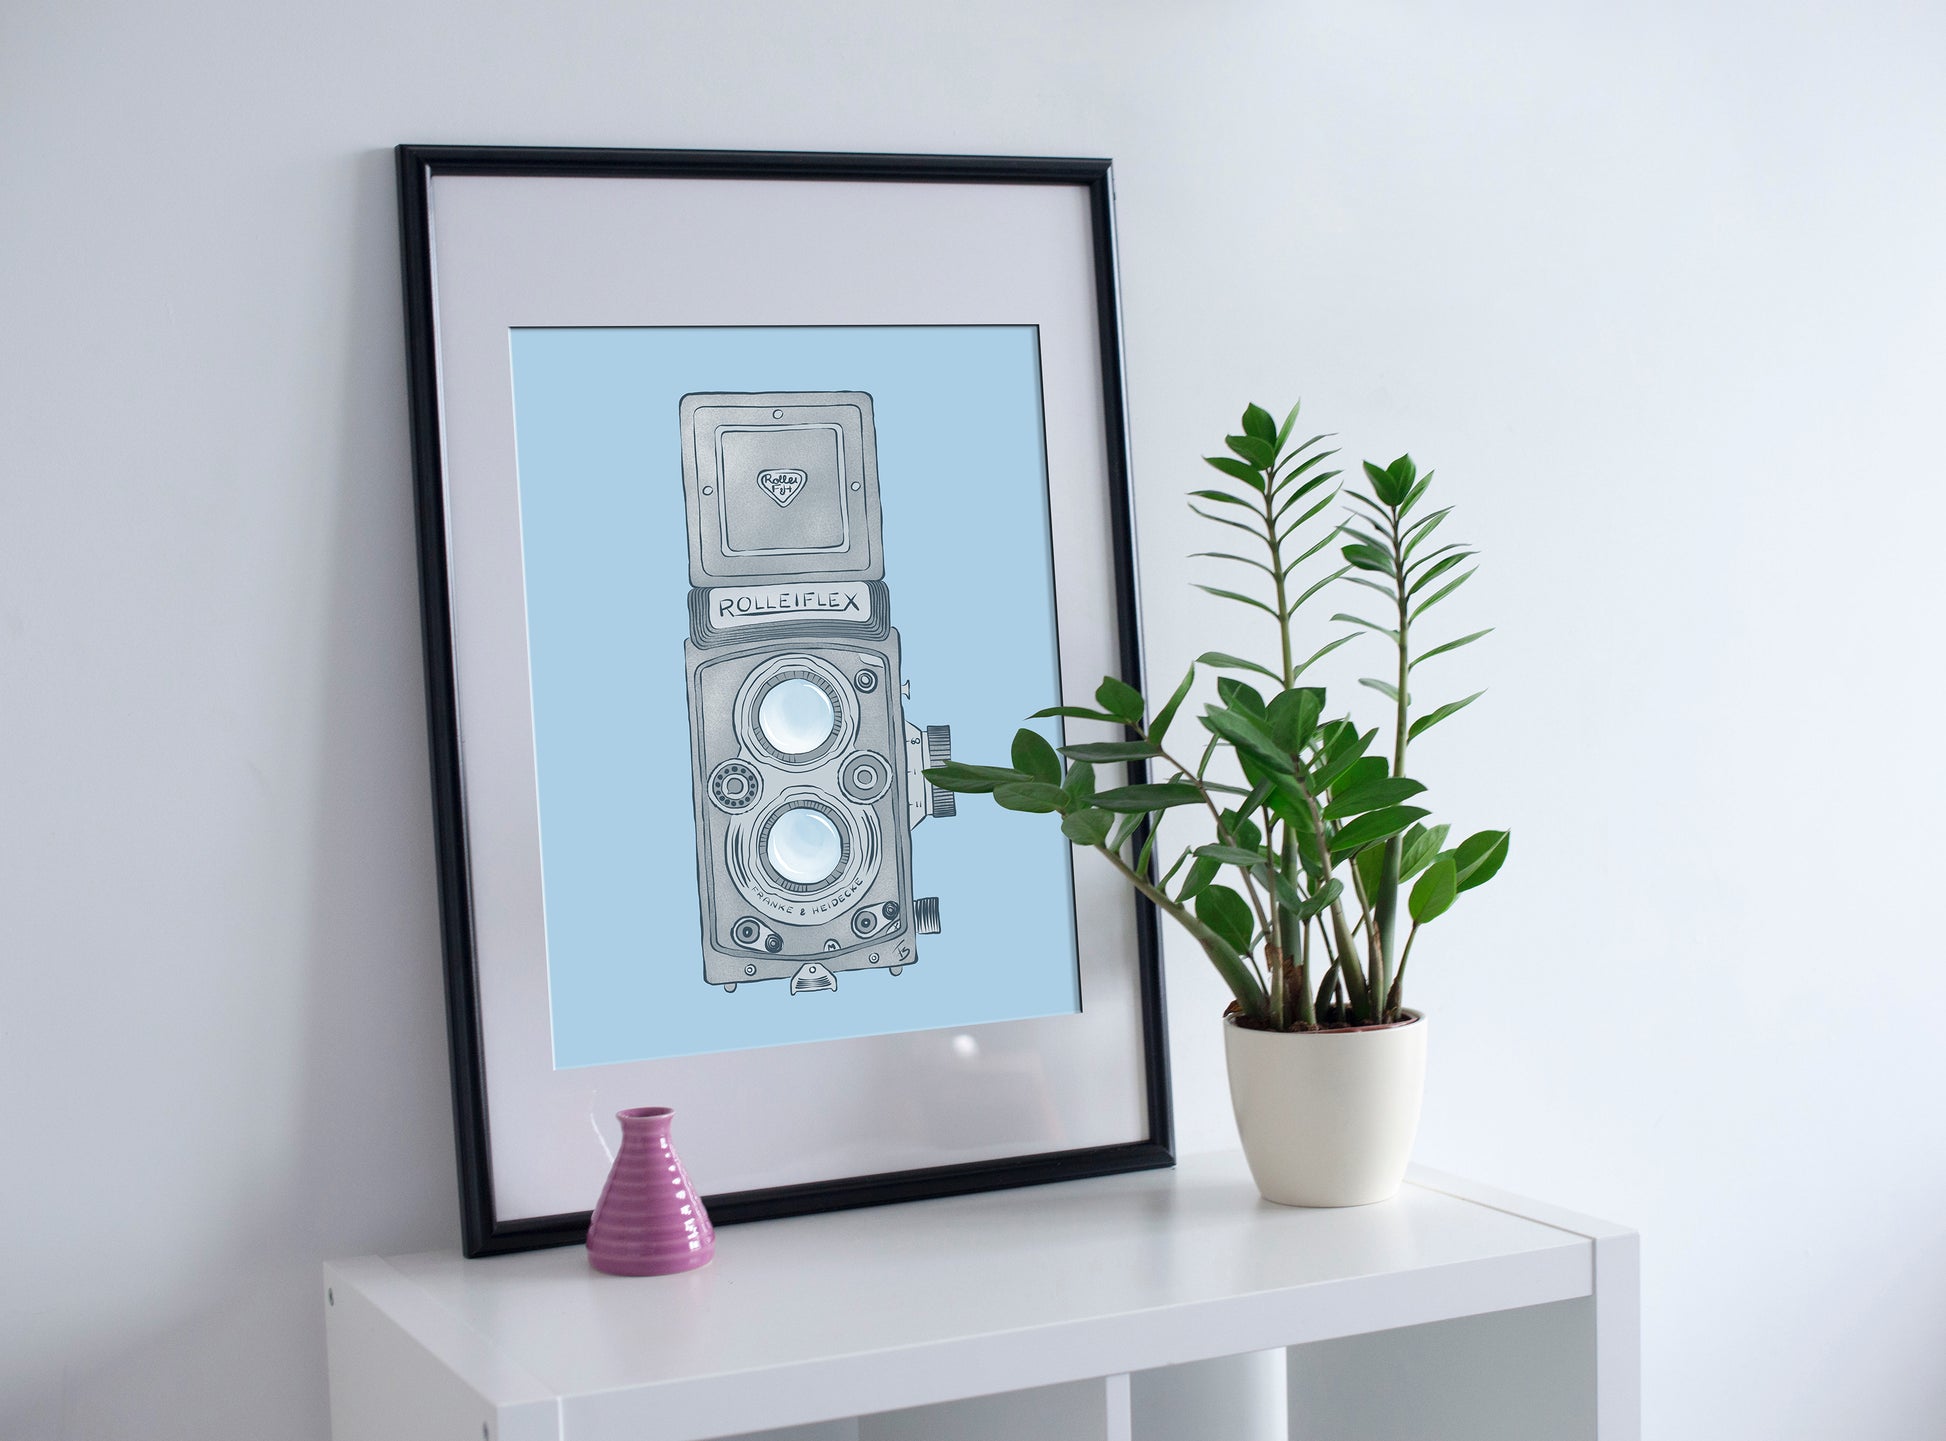 Illustration of vintage photography camera, rolleiflex model with two lenses and top viewfinder.  The camera is in medium to light gray tones, on a plain light blue background 